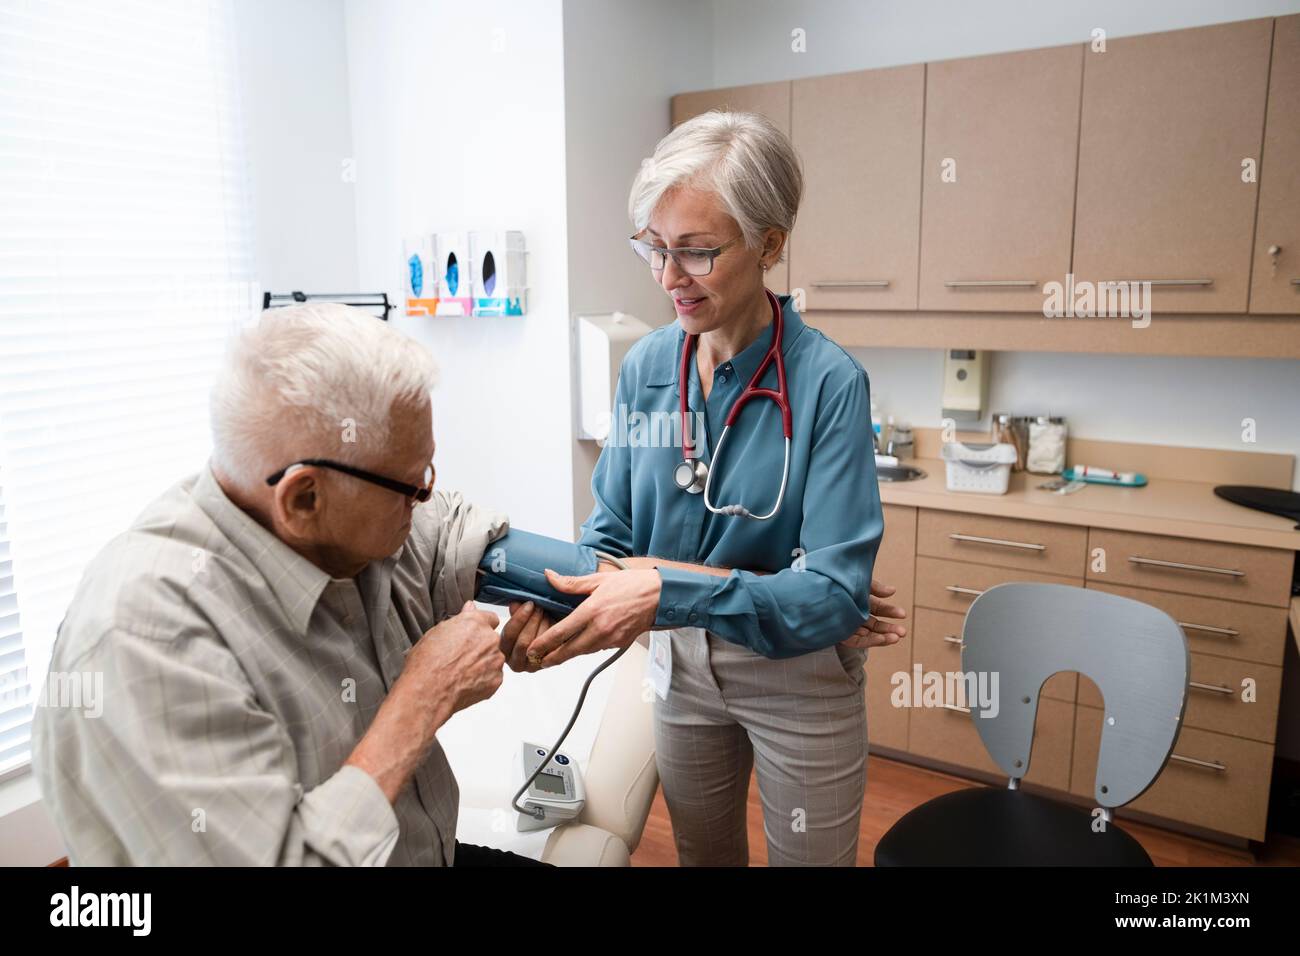 Doctor checking blood pressure of senior patient in clinic exam room Stock Photo